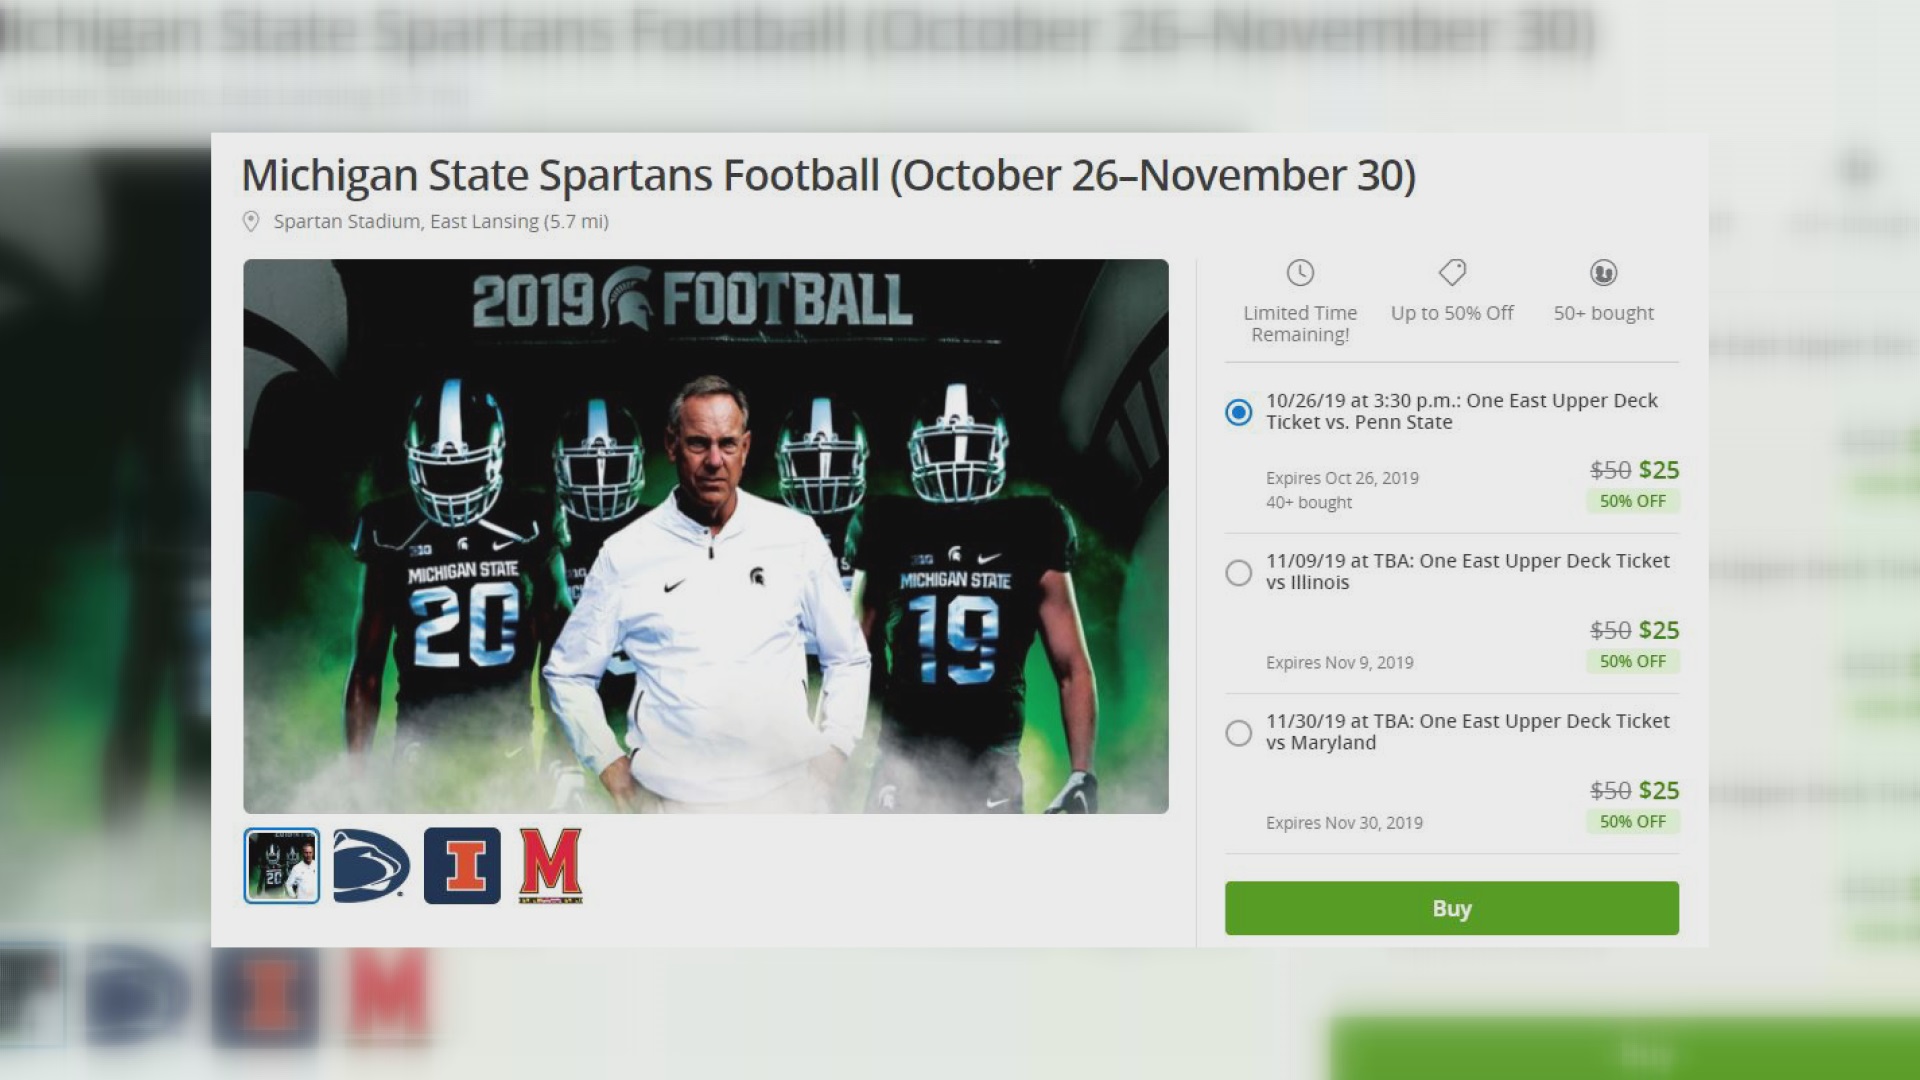 Msu Football Tickets Available On Groupon